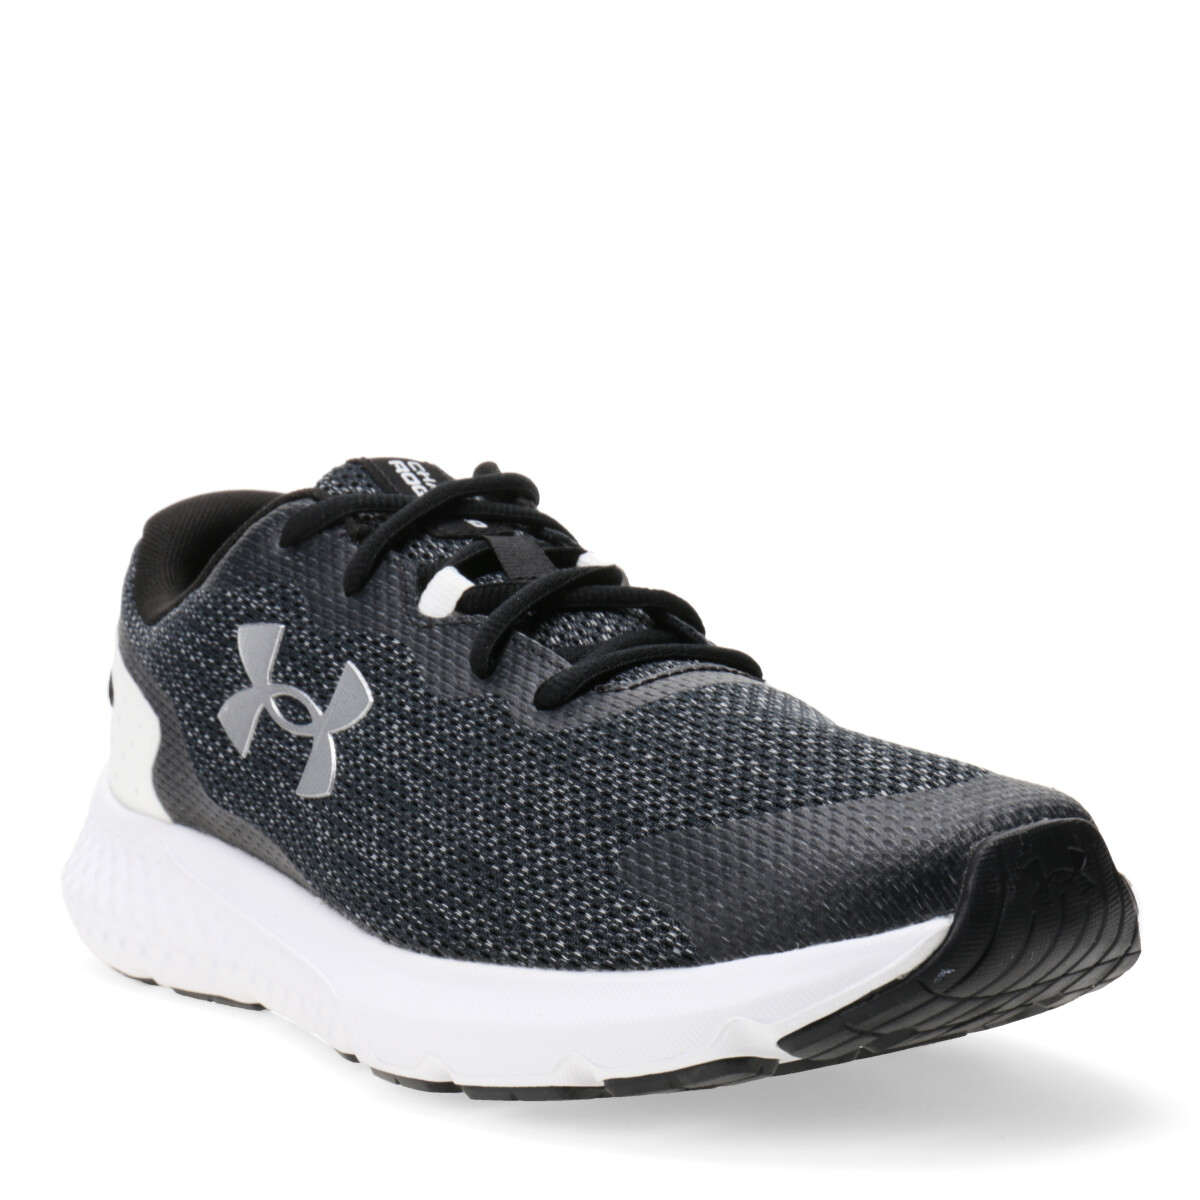 CHARGER ROGUE 3 Under Armour - Negro/Blanco 